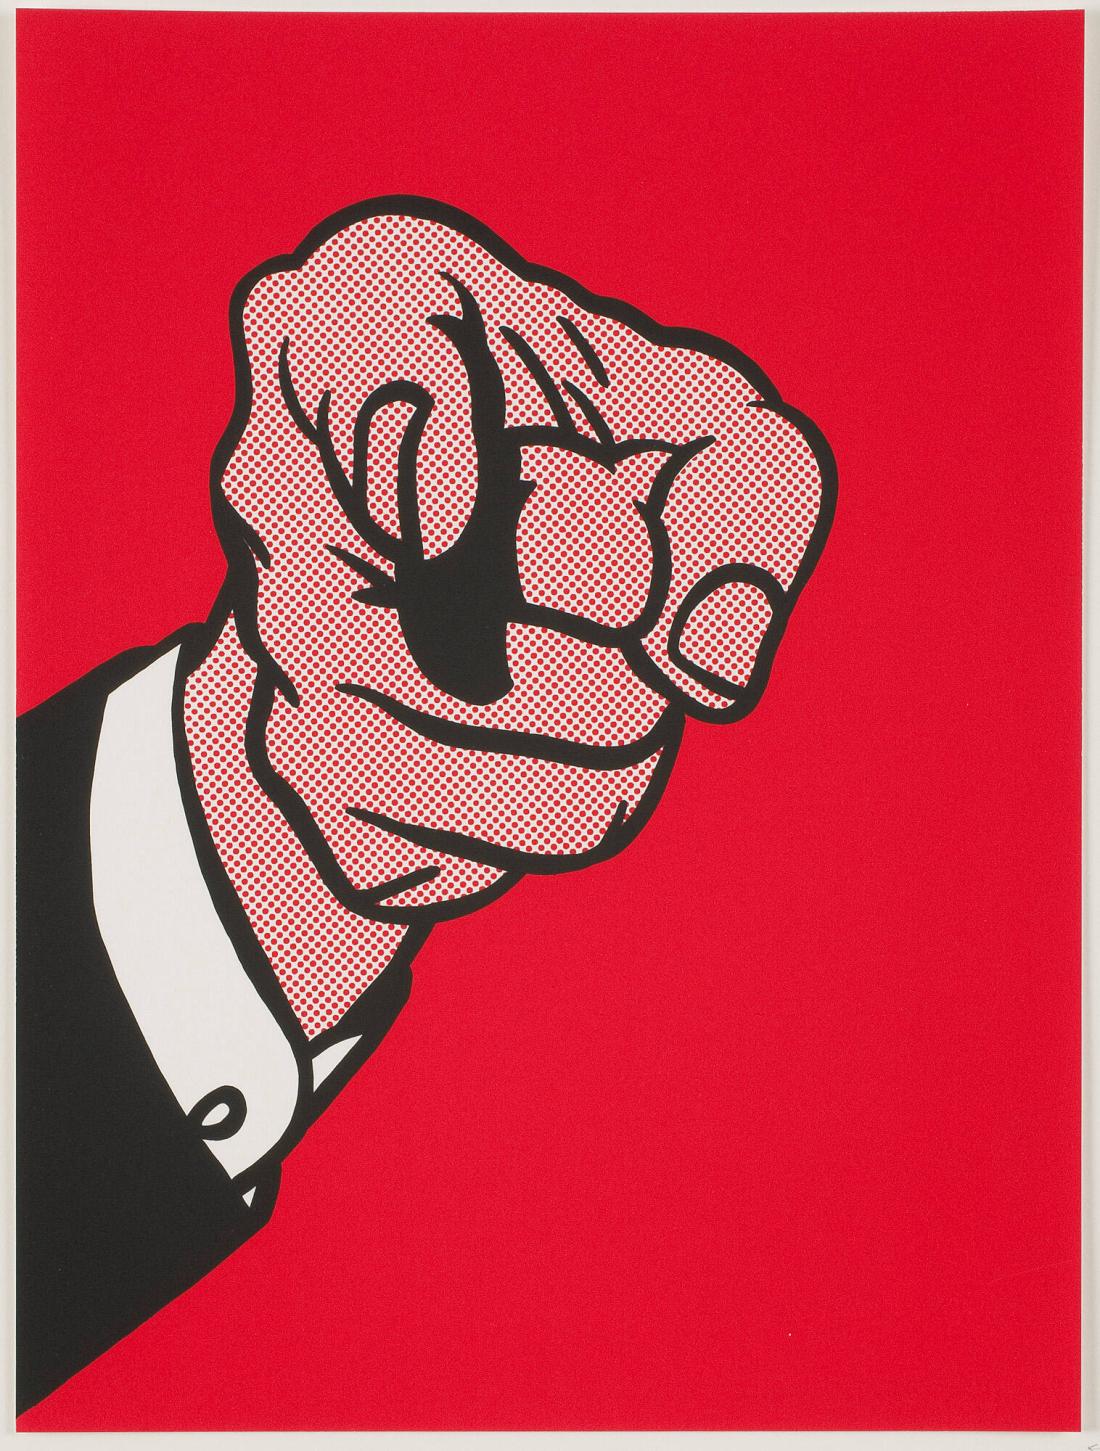 Finger Pointing. Ur portfolion "Works by artists in the New York Collection for Stockholm"